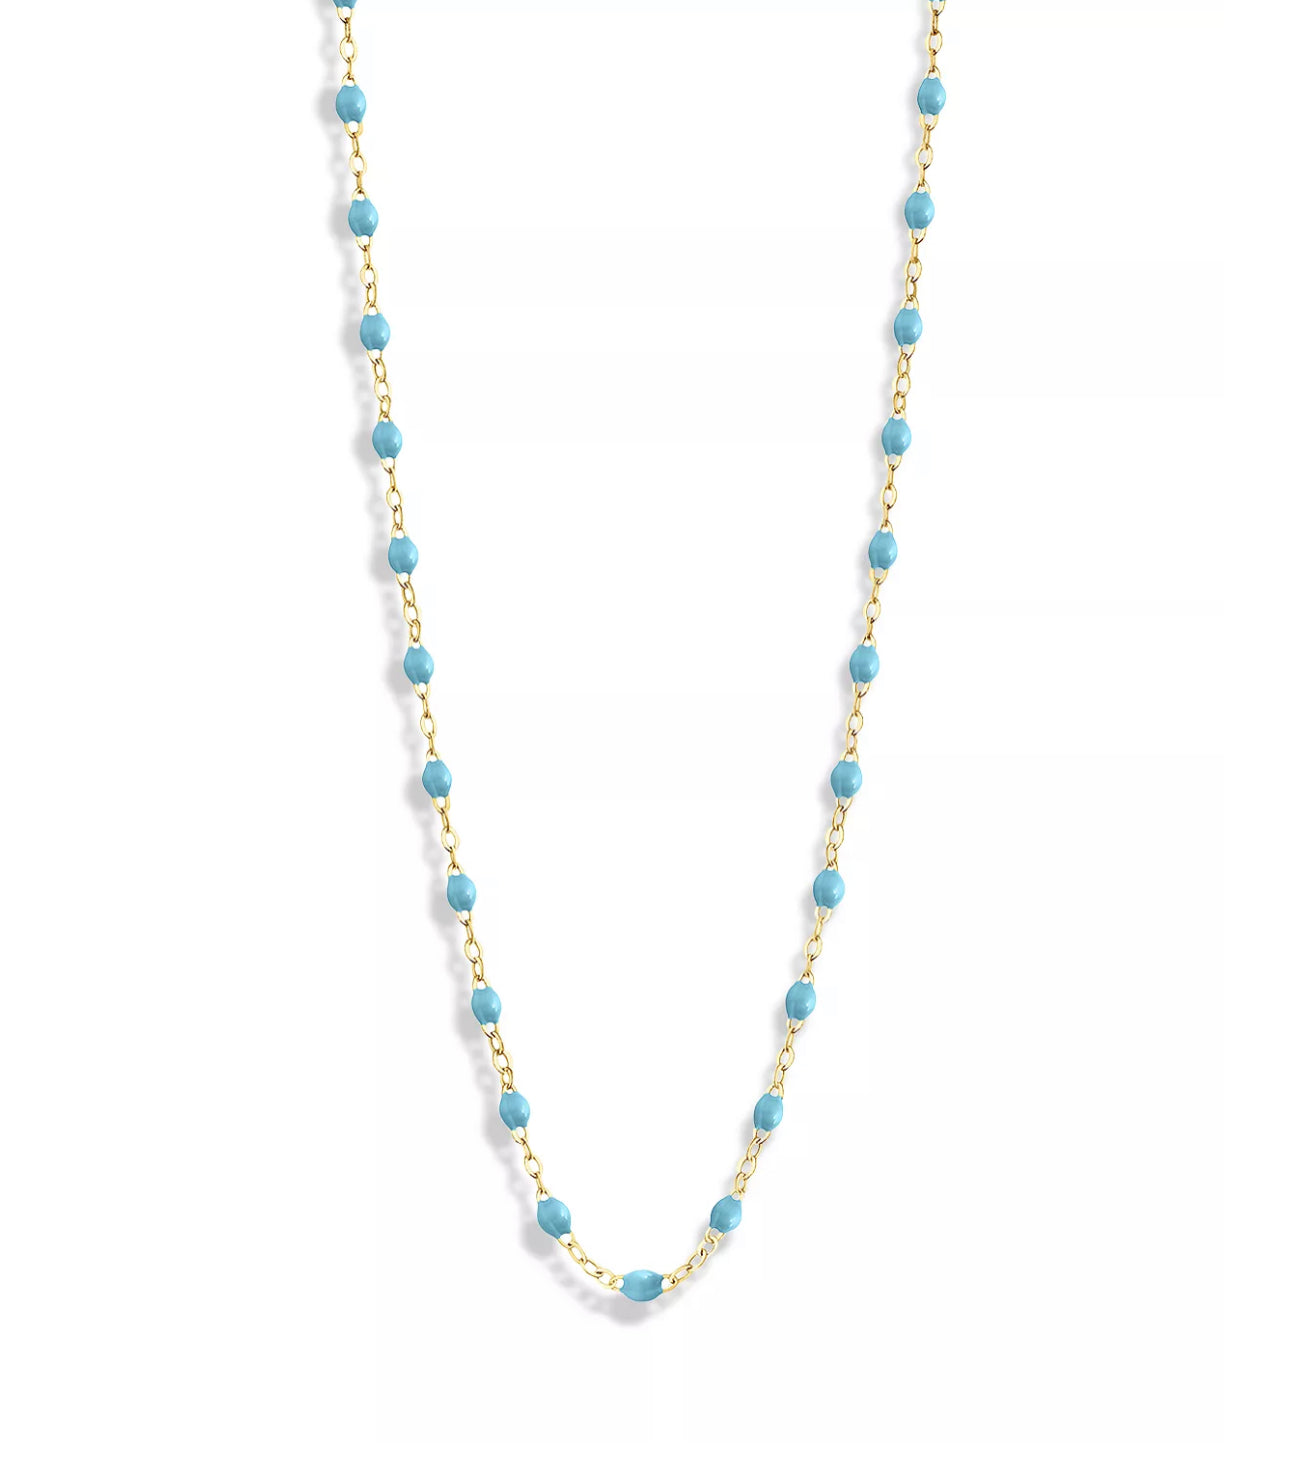 Giselle Necklace - Turquoise